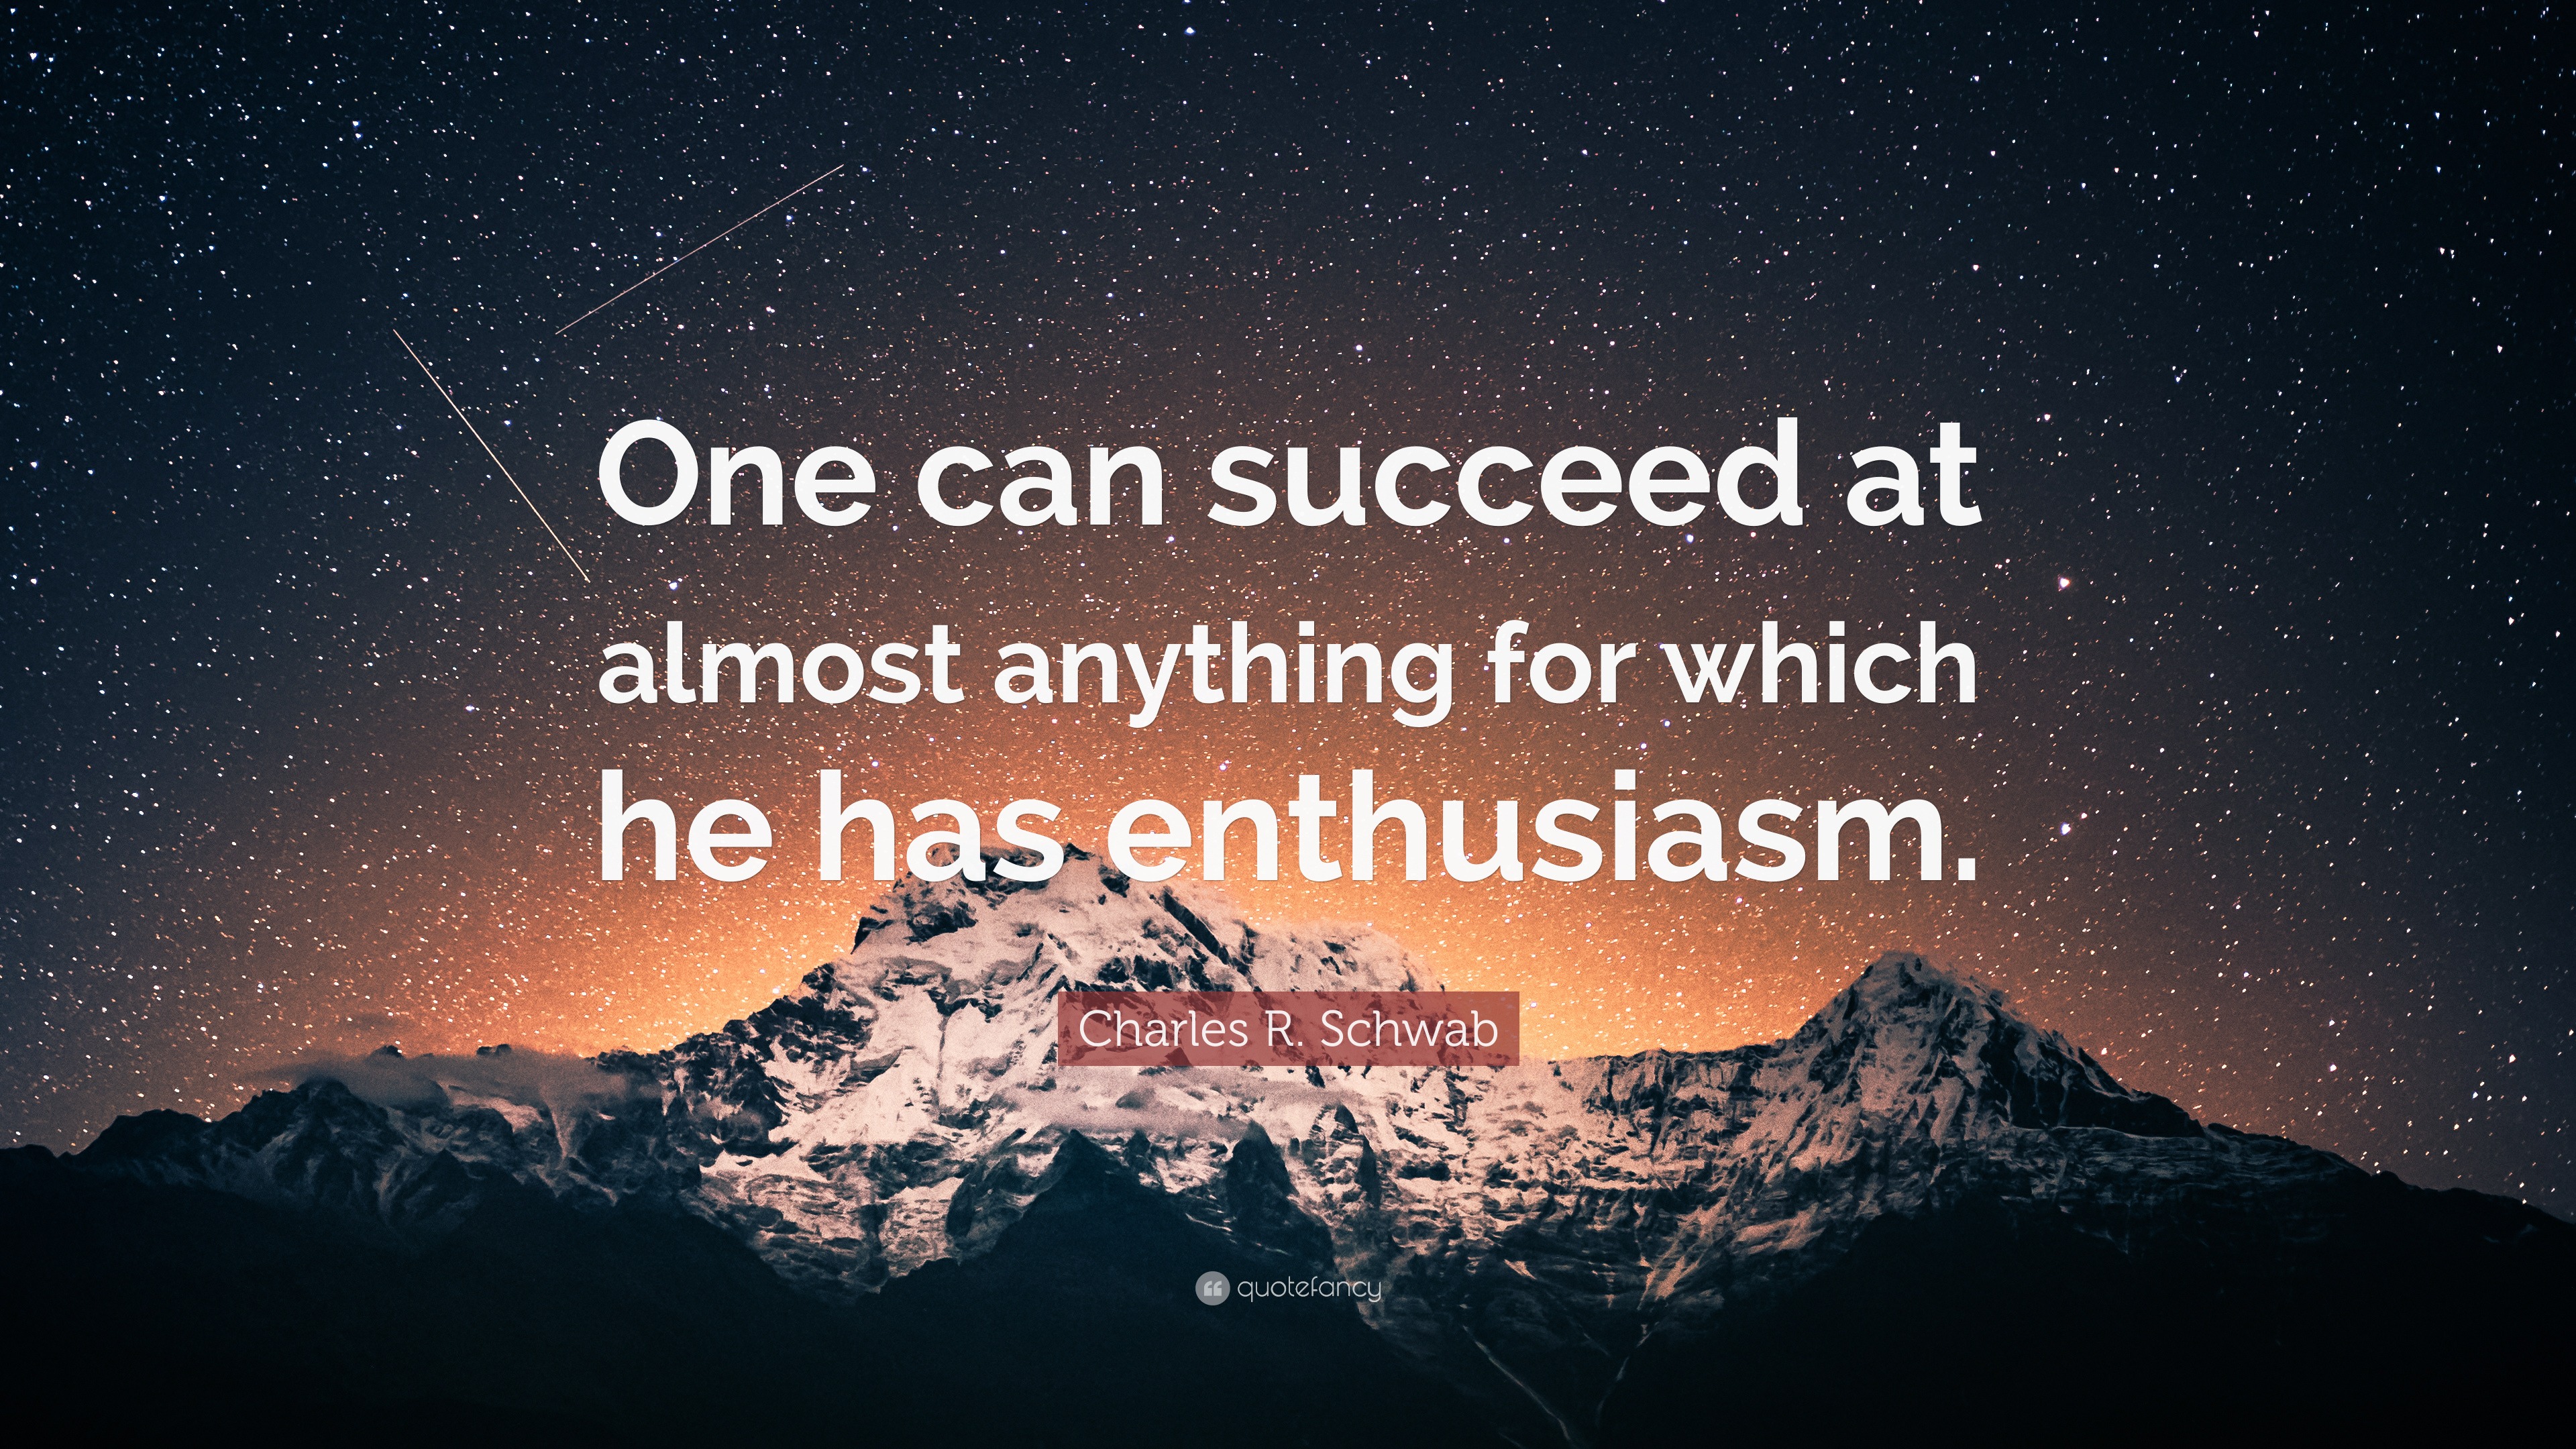 Charles R. Schwab Quote: “One can succeed at almost ...